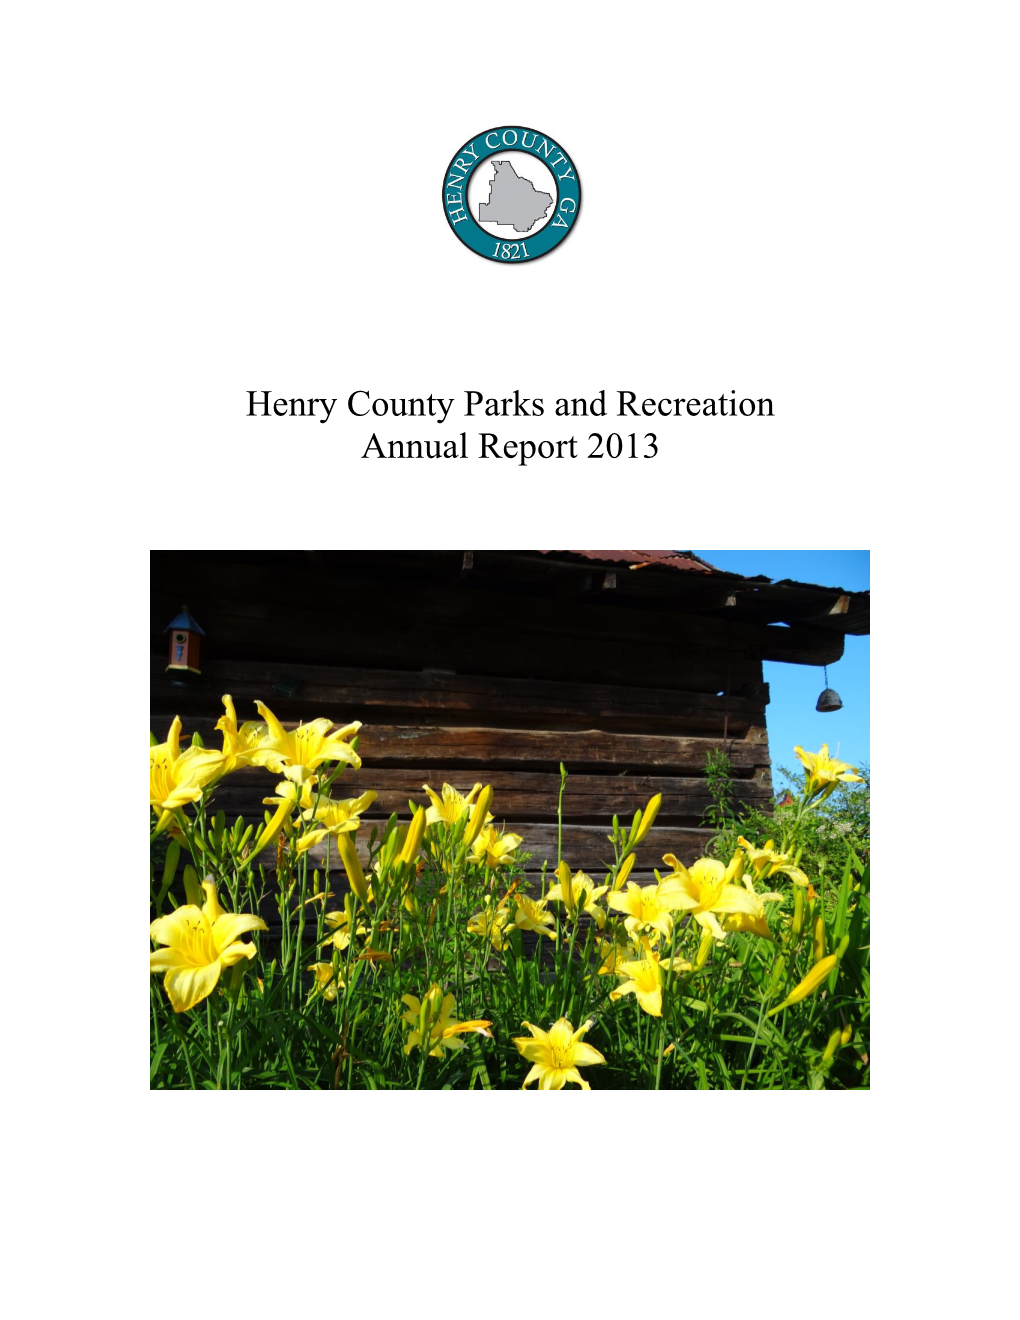 Henry County Parks and Recreation Annual Report 2013